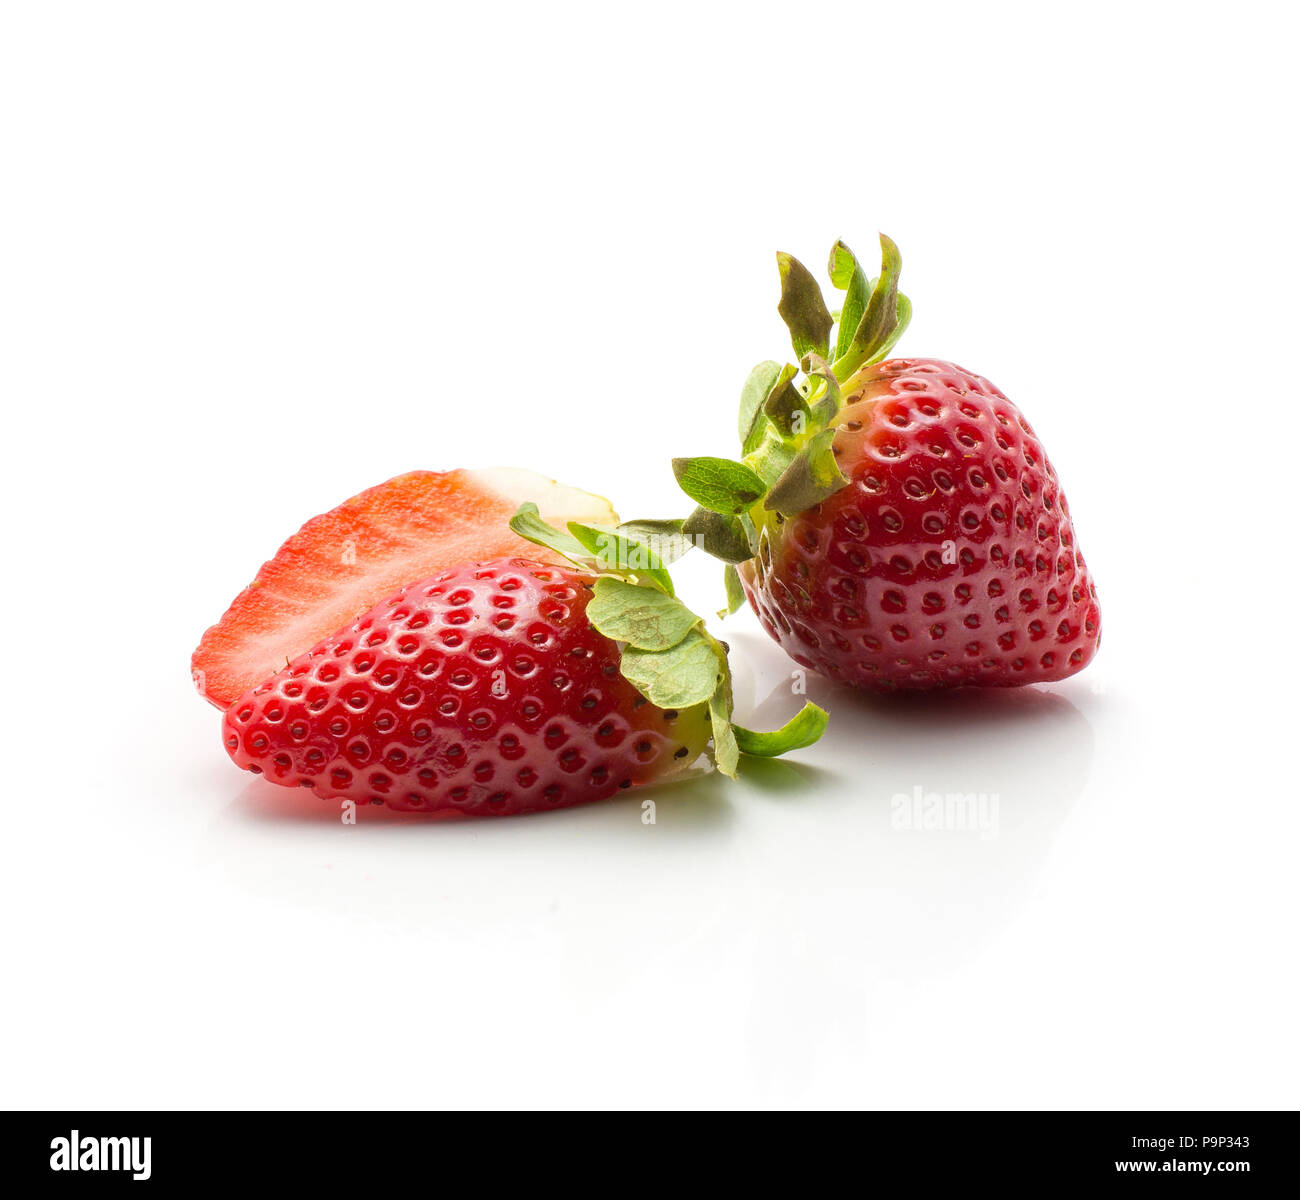 Sliced garden strawberry and one whole isolated on white background Stock Photo